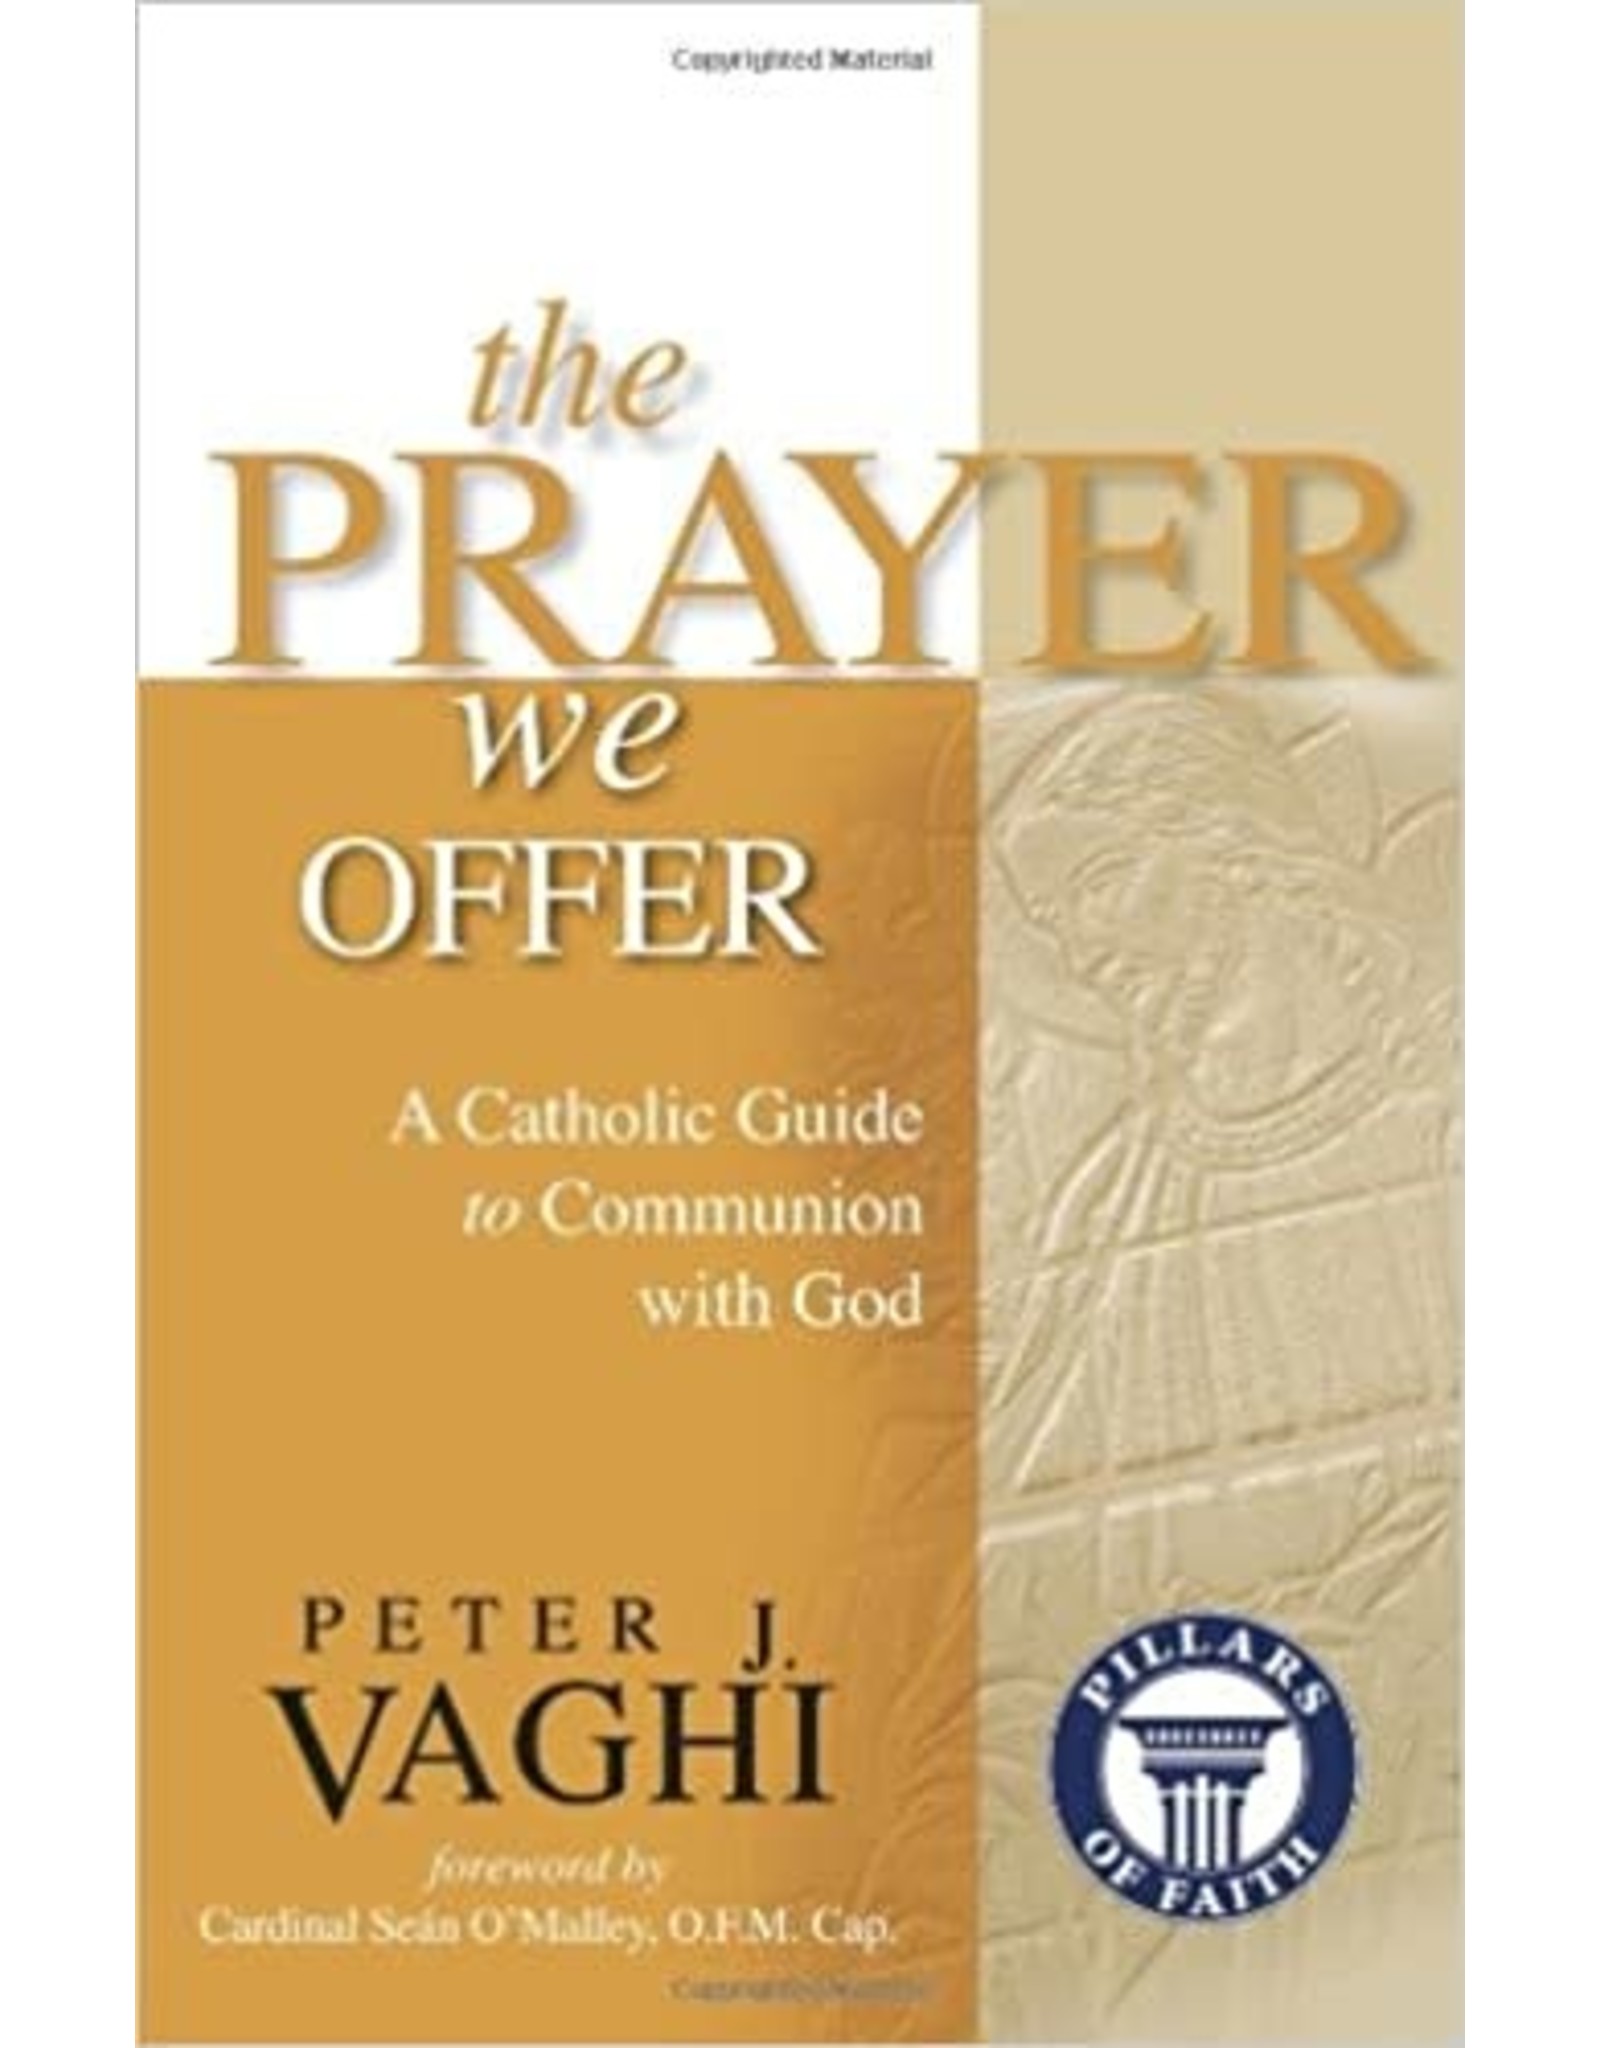 The Prayer We Offer: A Catholic Guide to Communion with God